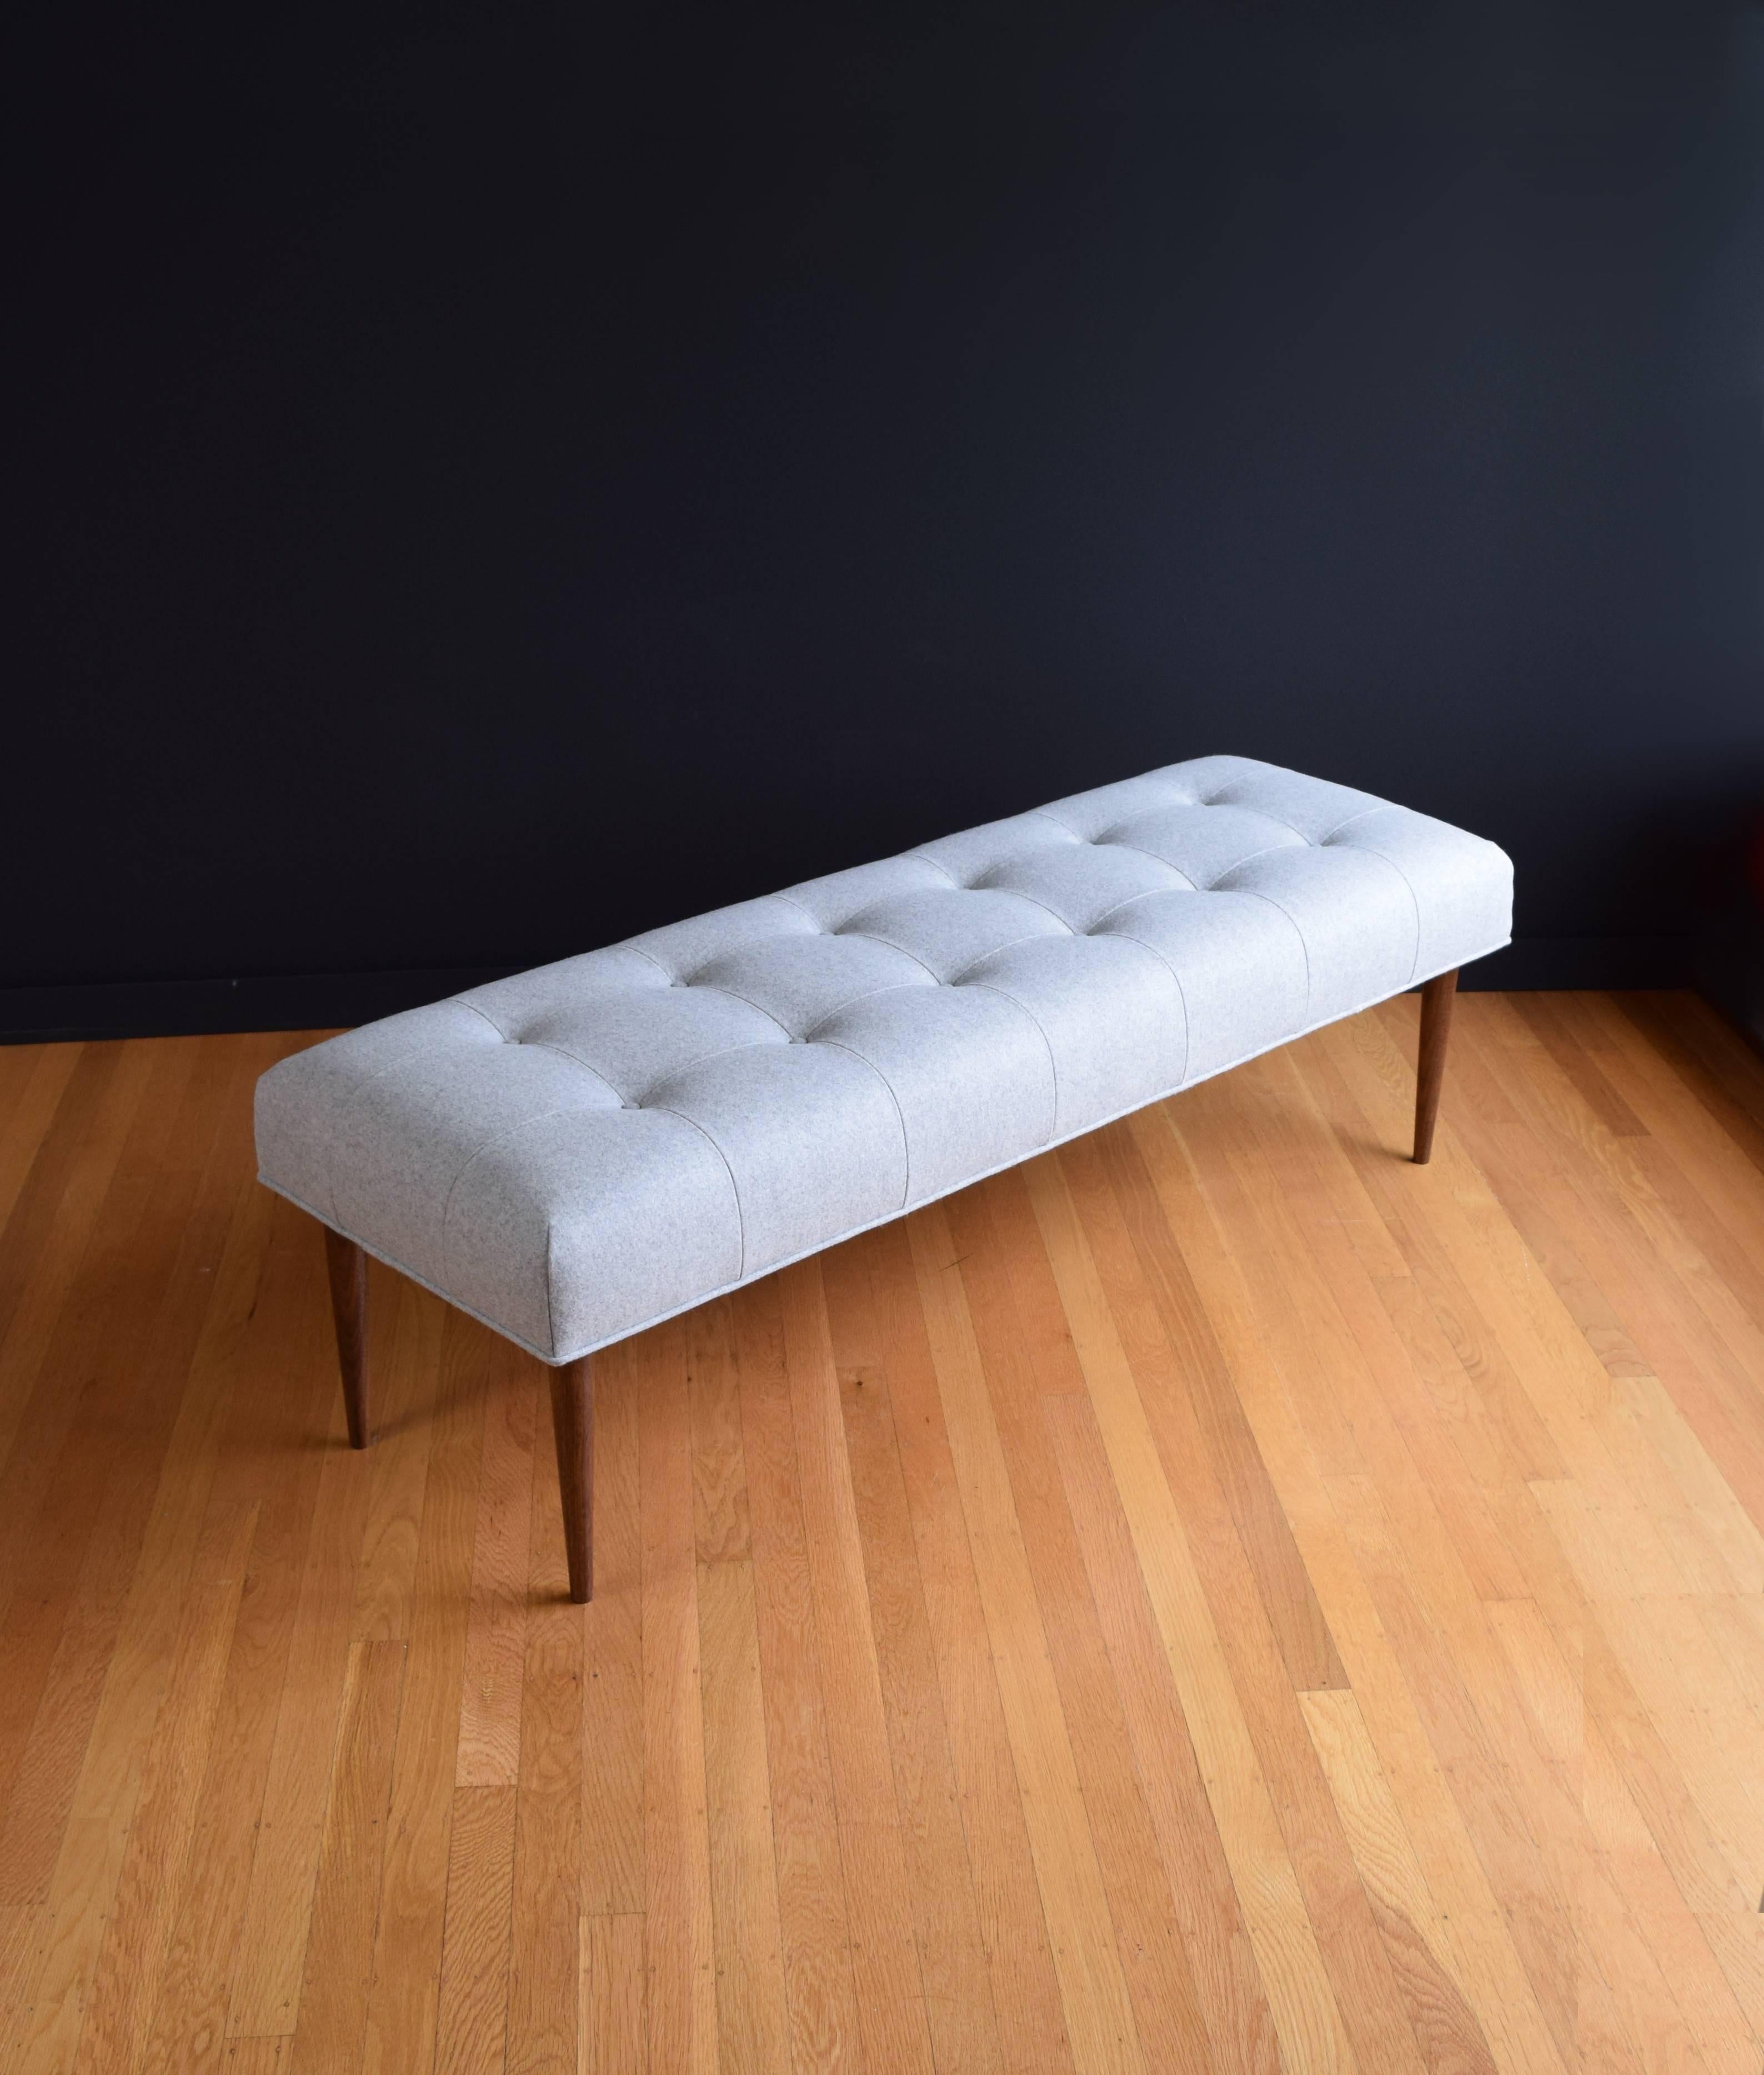 Made to be both durable and responsible, this bench is handmade with a hardwood frame of FSC certified poplar, corner blocks of reclaimed oak, webbing suspension of renewable jute, and premium high density foam cushioning for years of comfort. Shown